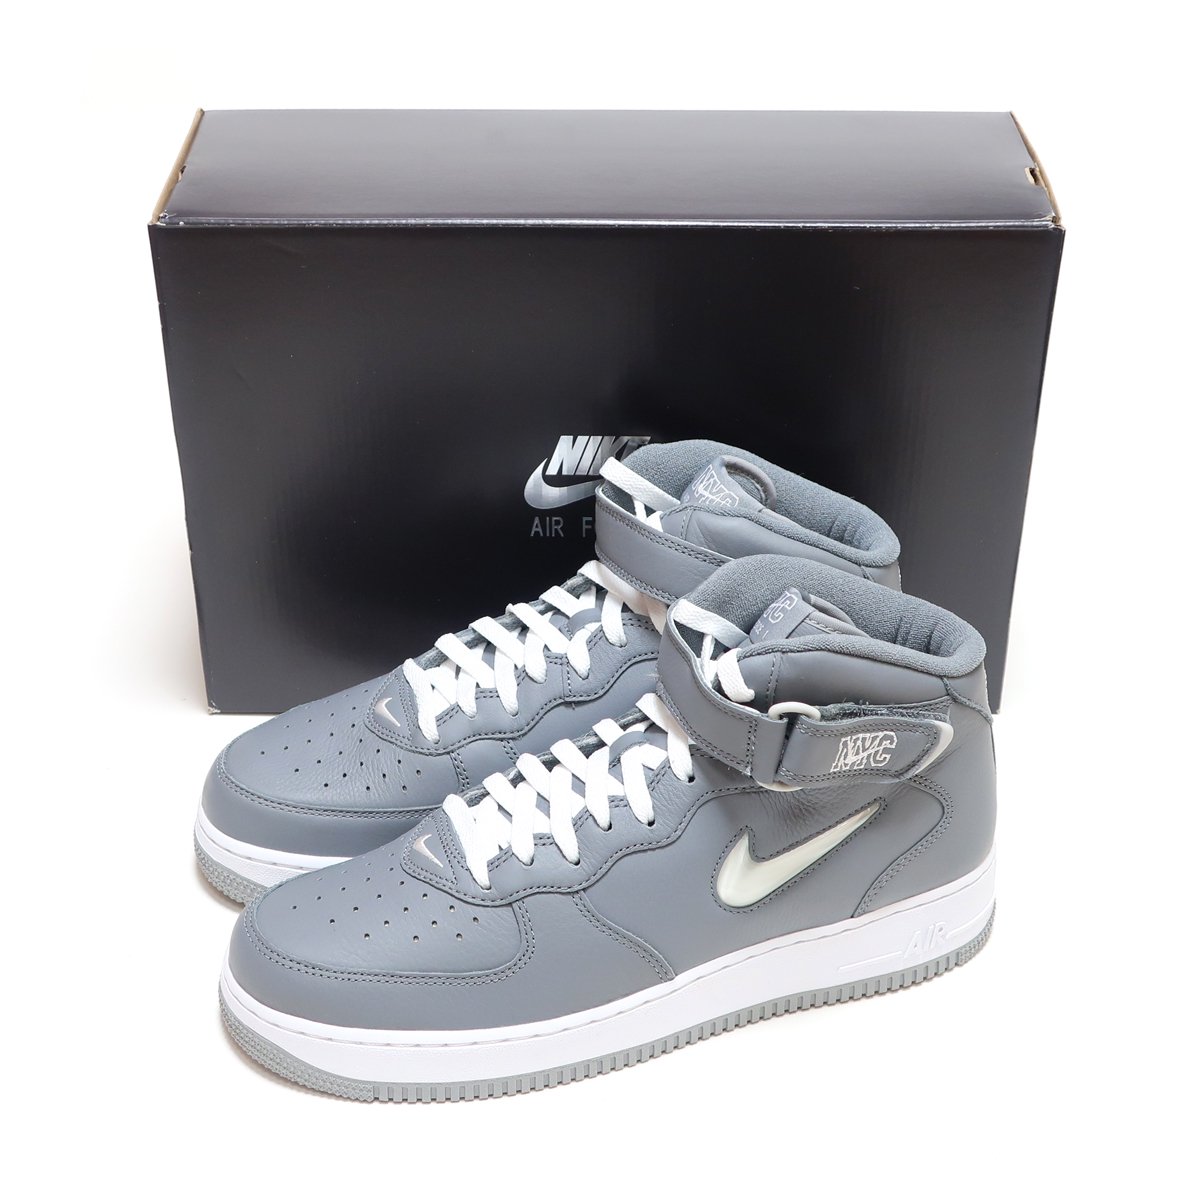 NIKE AIR FORCE 1 MID QS COOL GREY/WHITE NYC NEW YORK